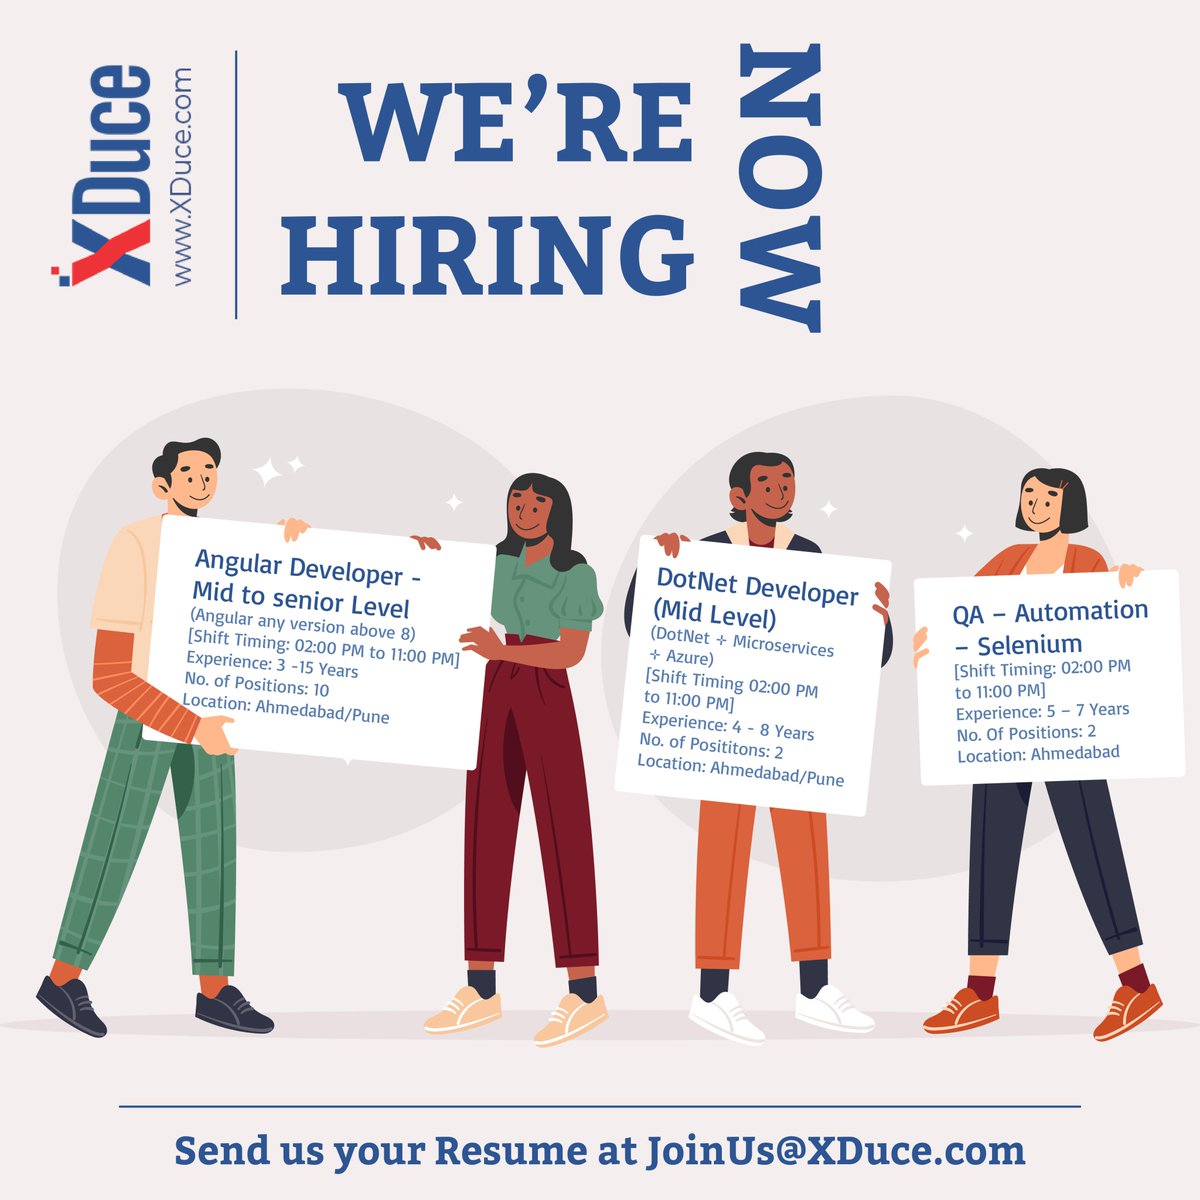 We're Hiring Now!
Check out the vacancies and apply now!

You can send your resume at JoinUs@XDuce.com.

#xduce #CurrentJobs #hiringnow #CurrentVacancies #jobopening #angulardeveloper #dotnetdeveloper #QAautomation #ITJobs #ApplyNow #trendingnow